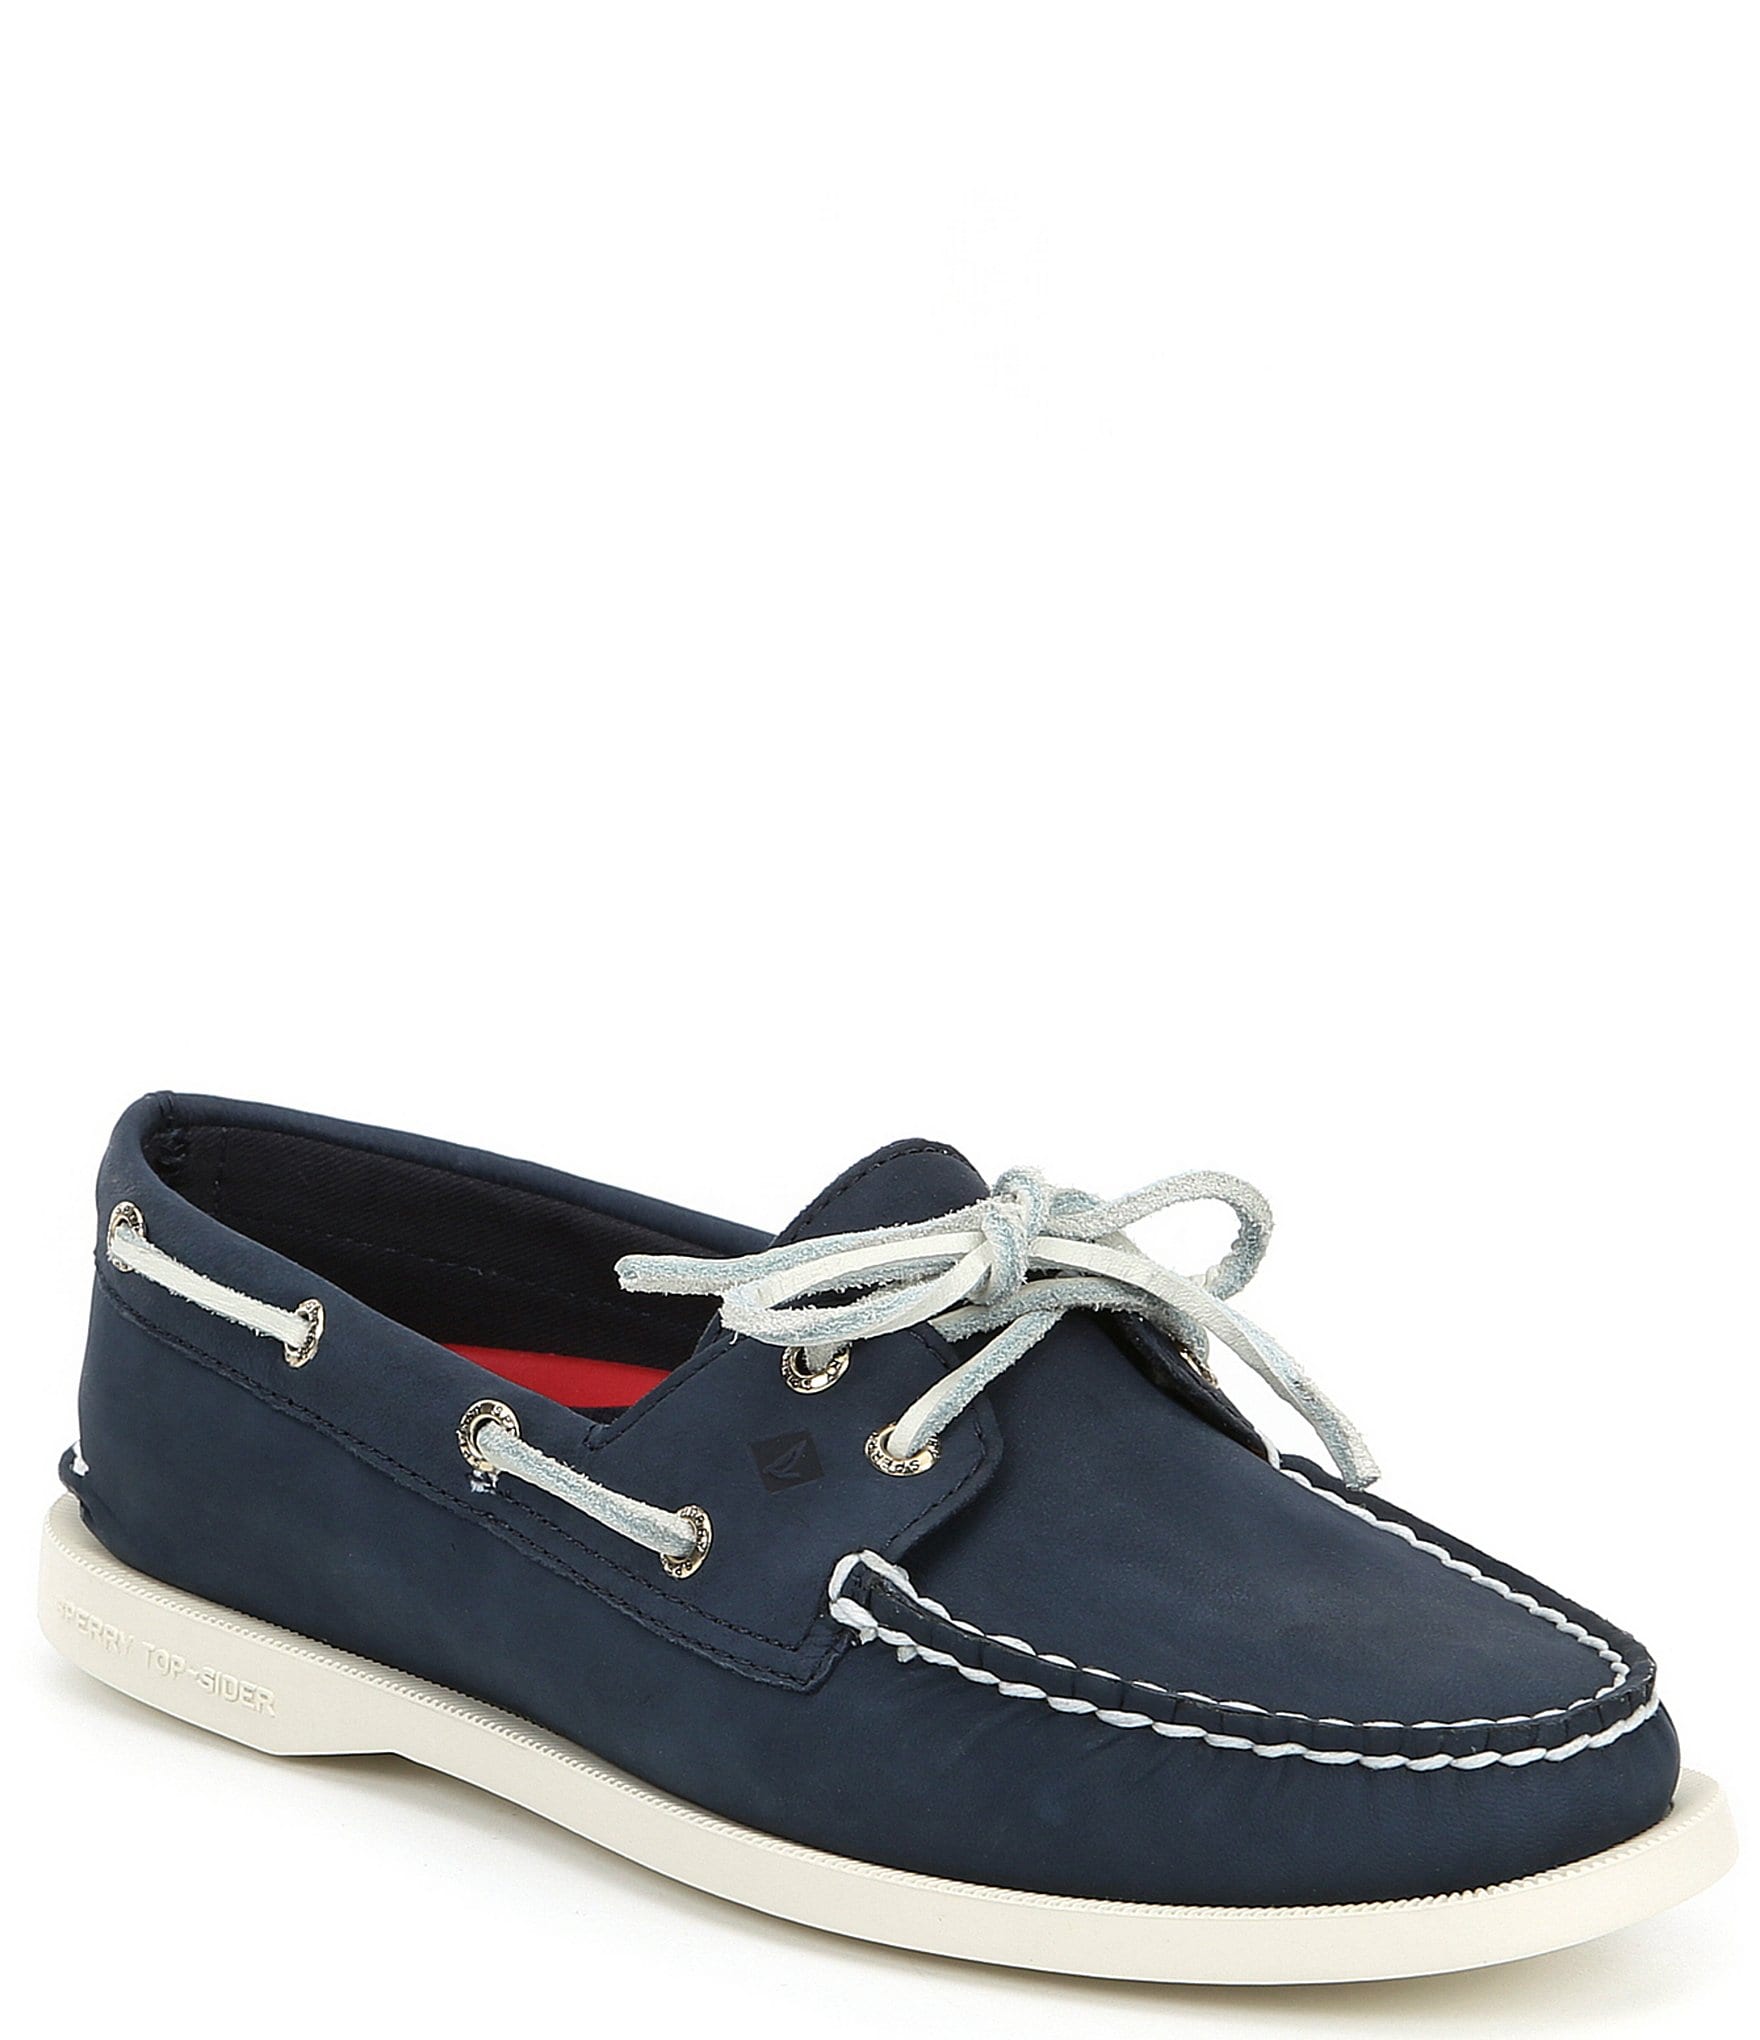 faith unconditional to call Sperry Women's Top-Sider Authentic Original Boat Shoes | Dillard's